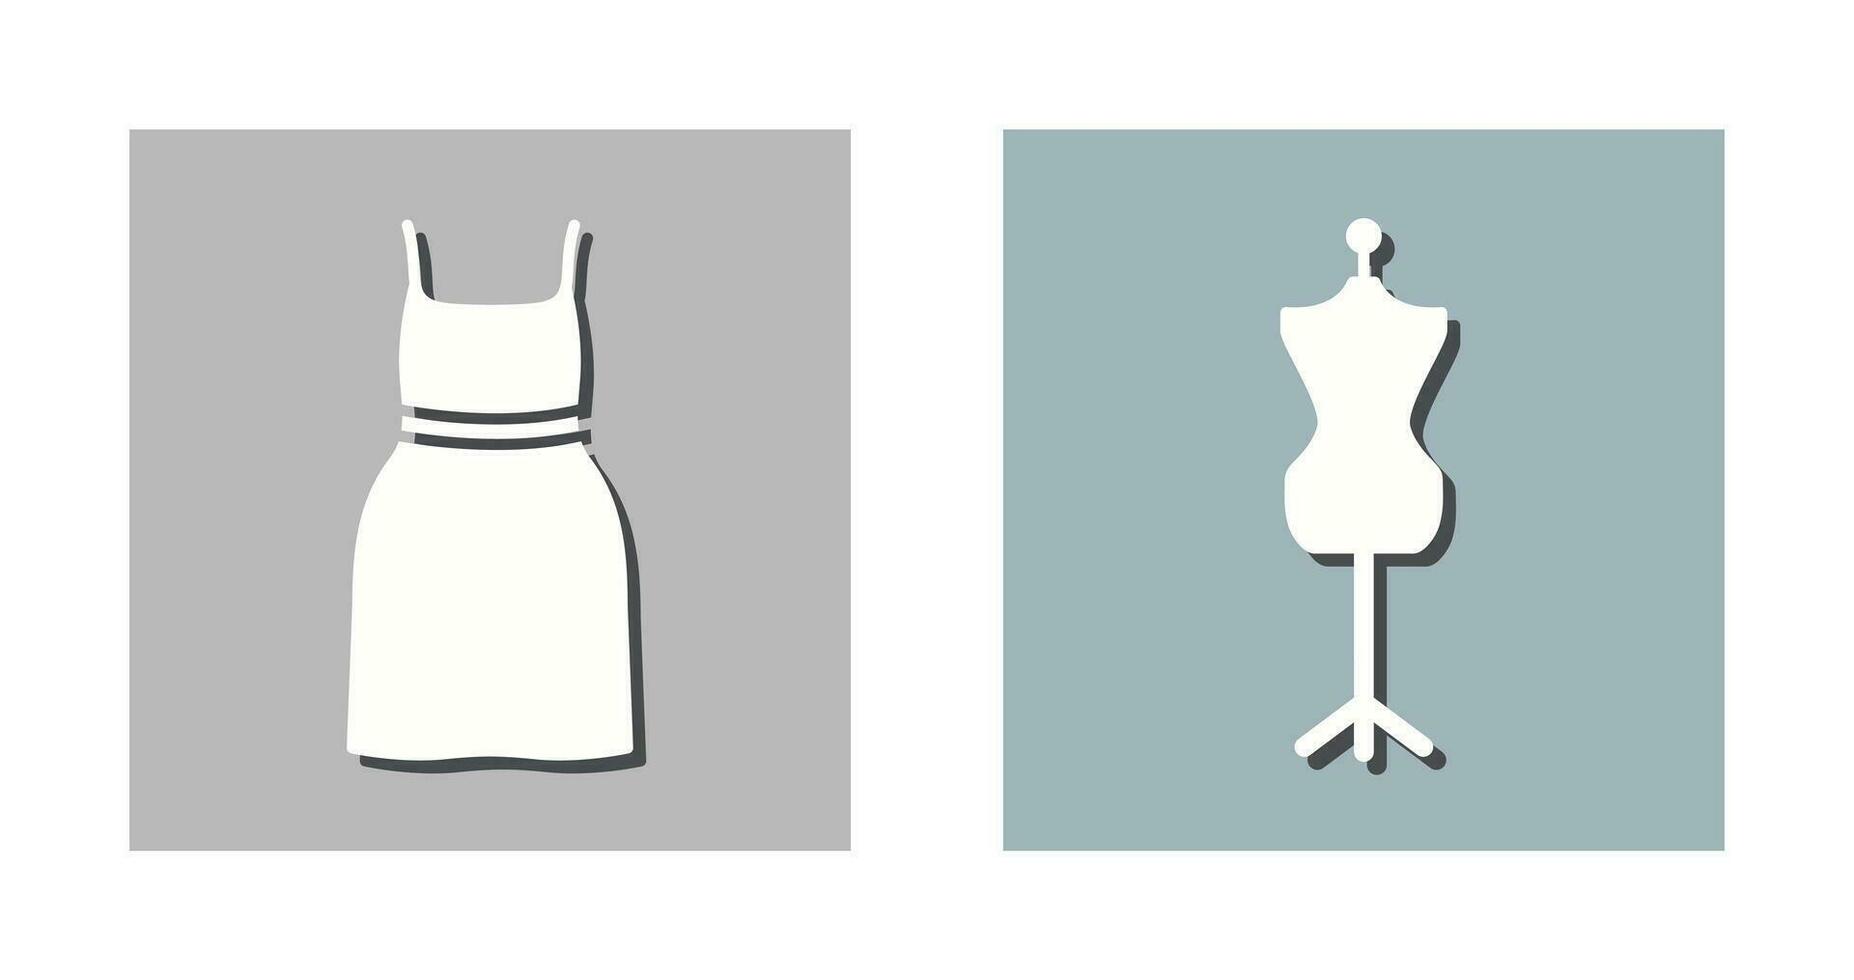 Cocktail Dress and Dress Holder Icon vector